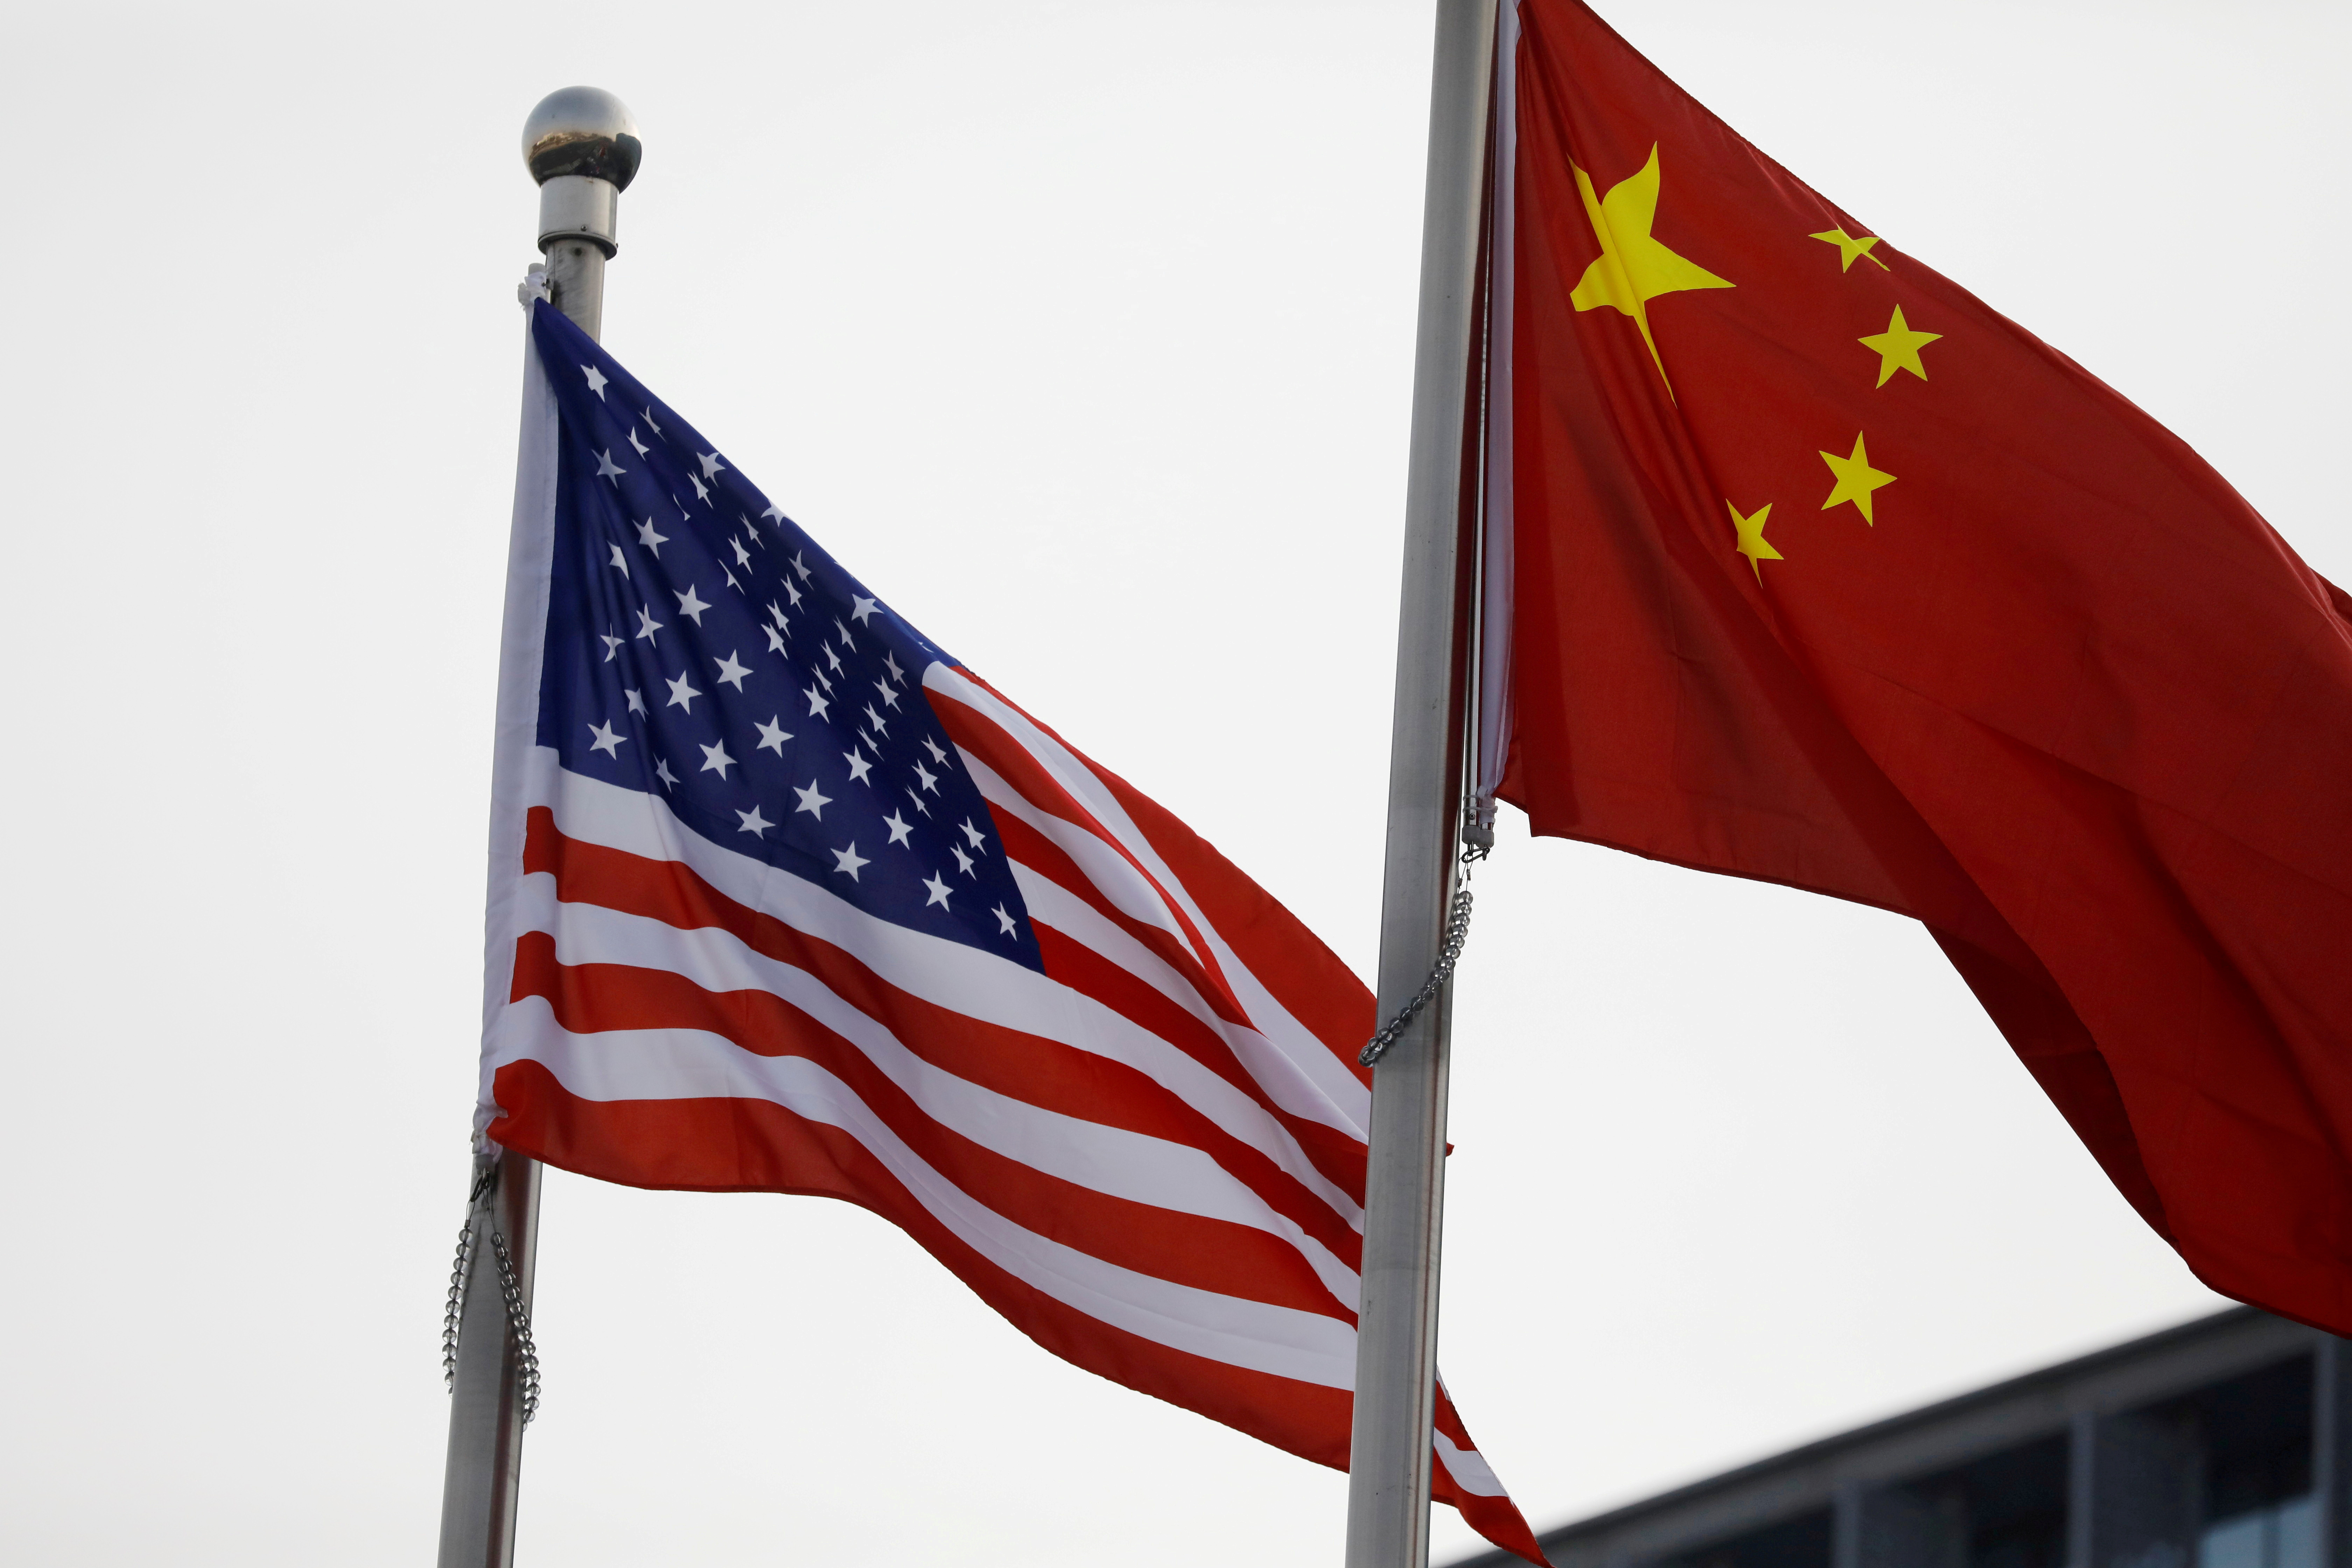 Chinese and U.S. flags flutter outside the building of an American company in Beijing, China January 21, 2021. REUTERS/Tingshu Wang